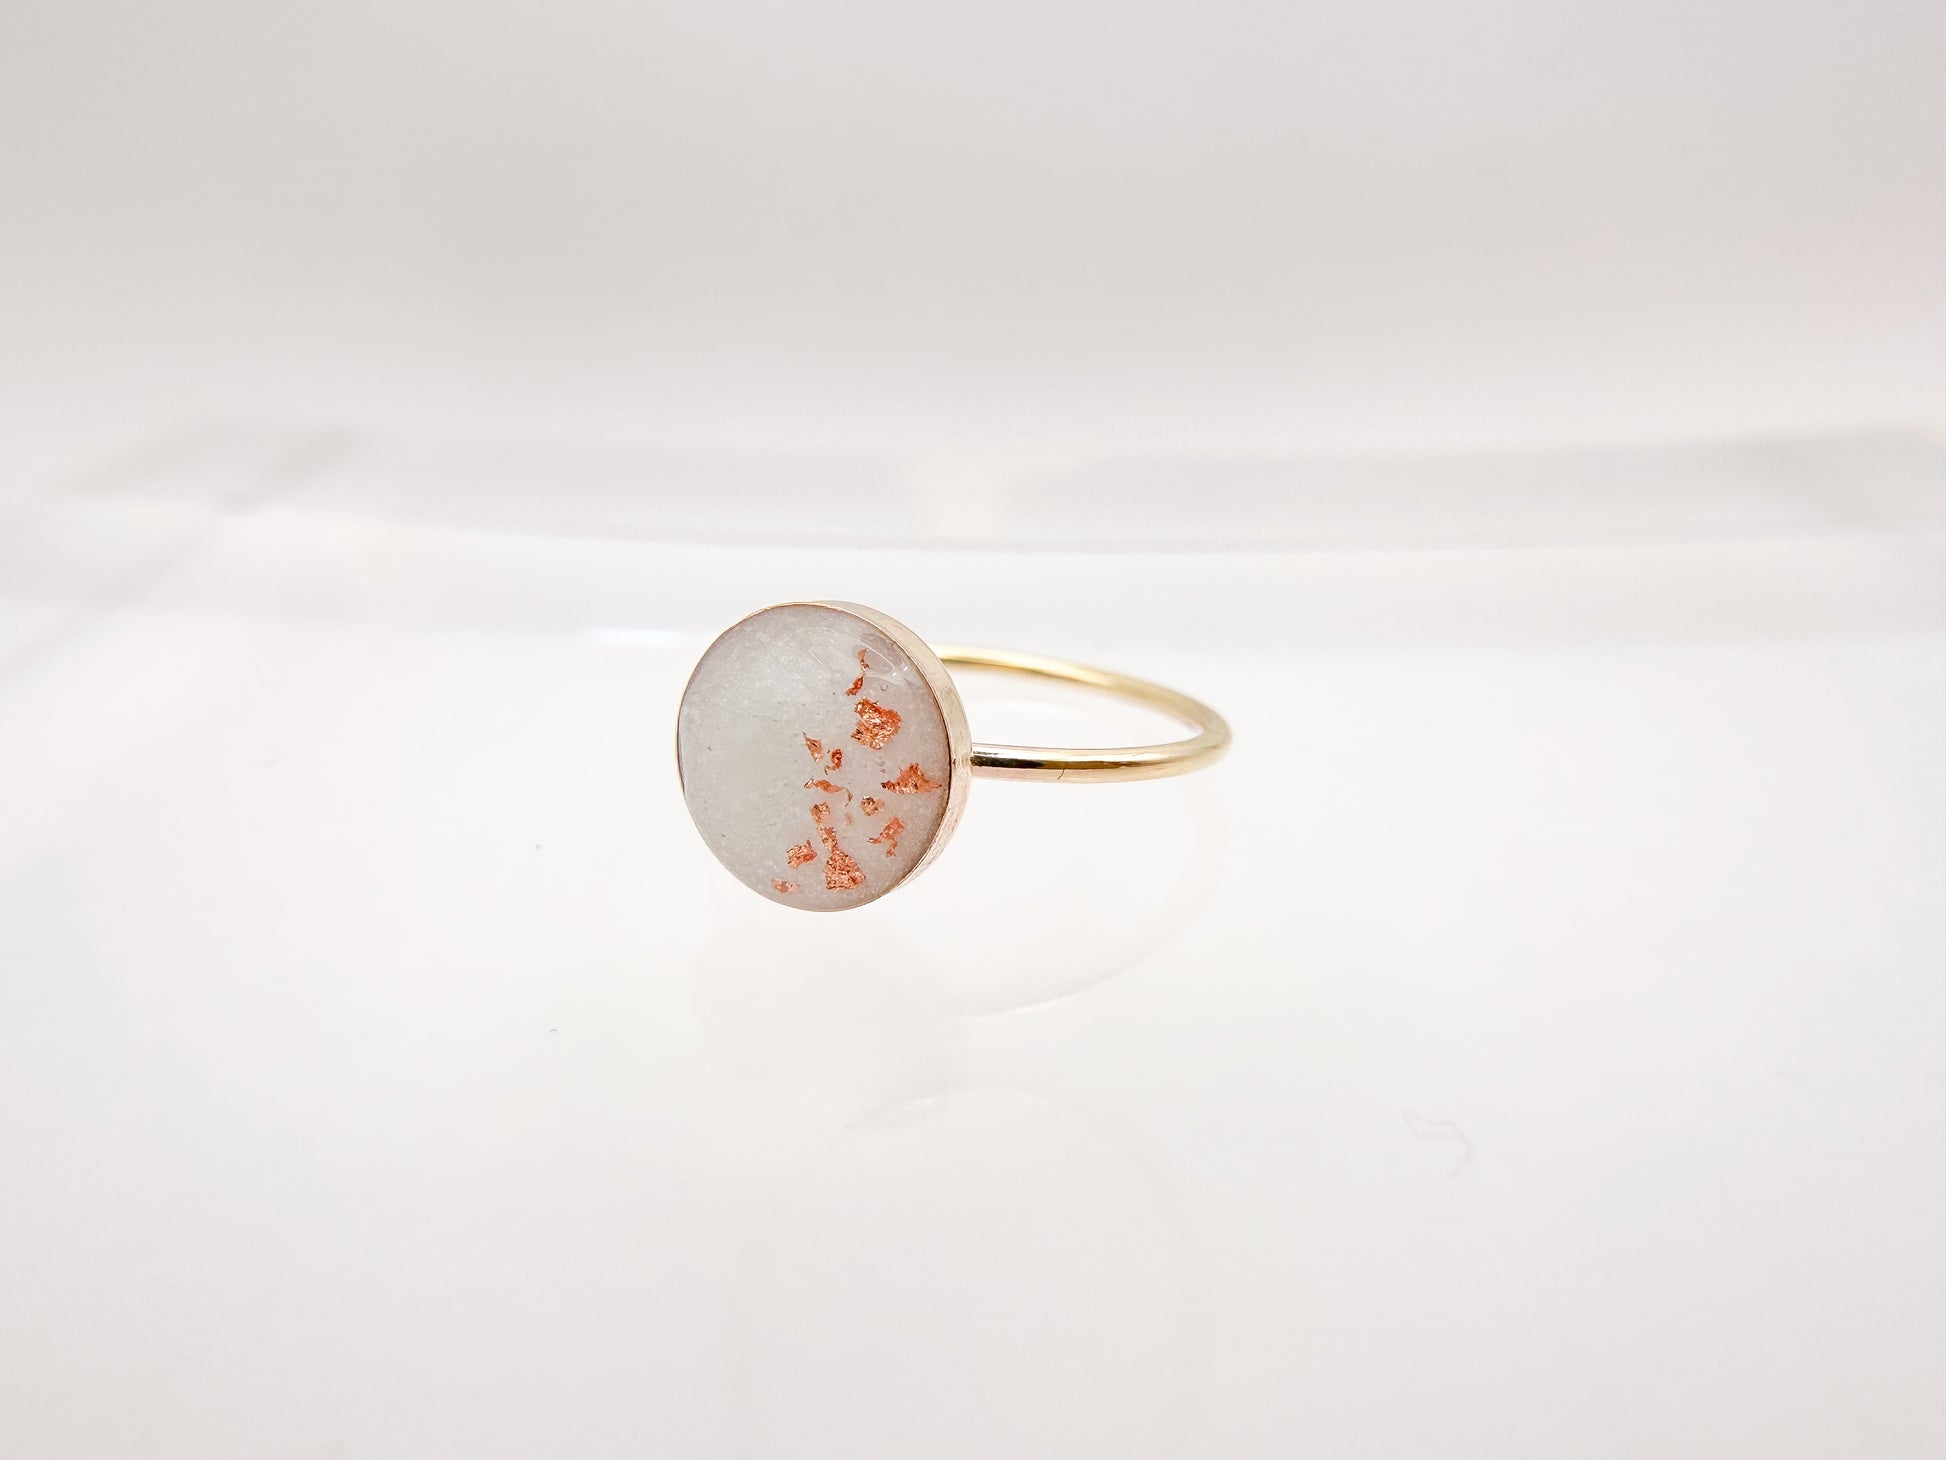 Gold ring with Breastmilk and Copper Flakes